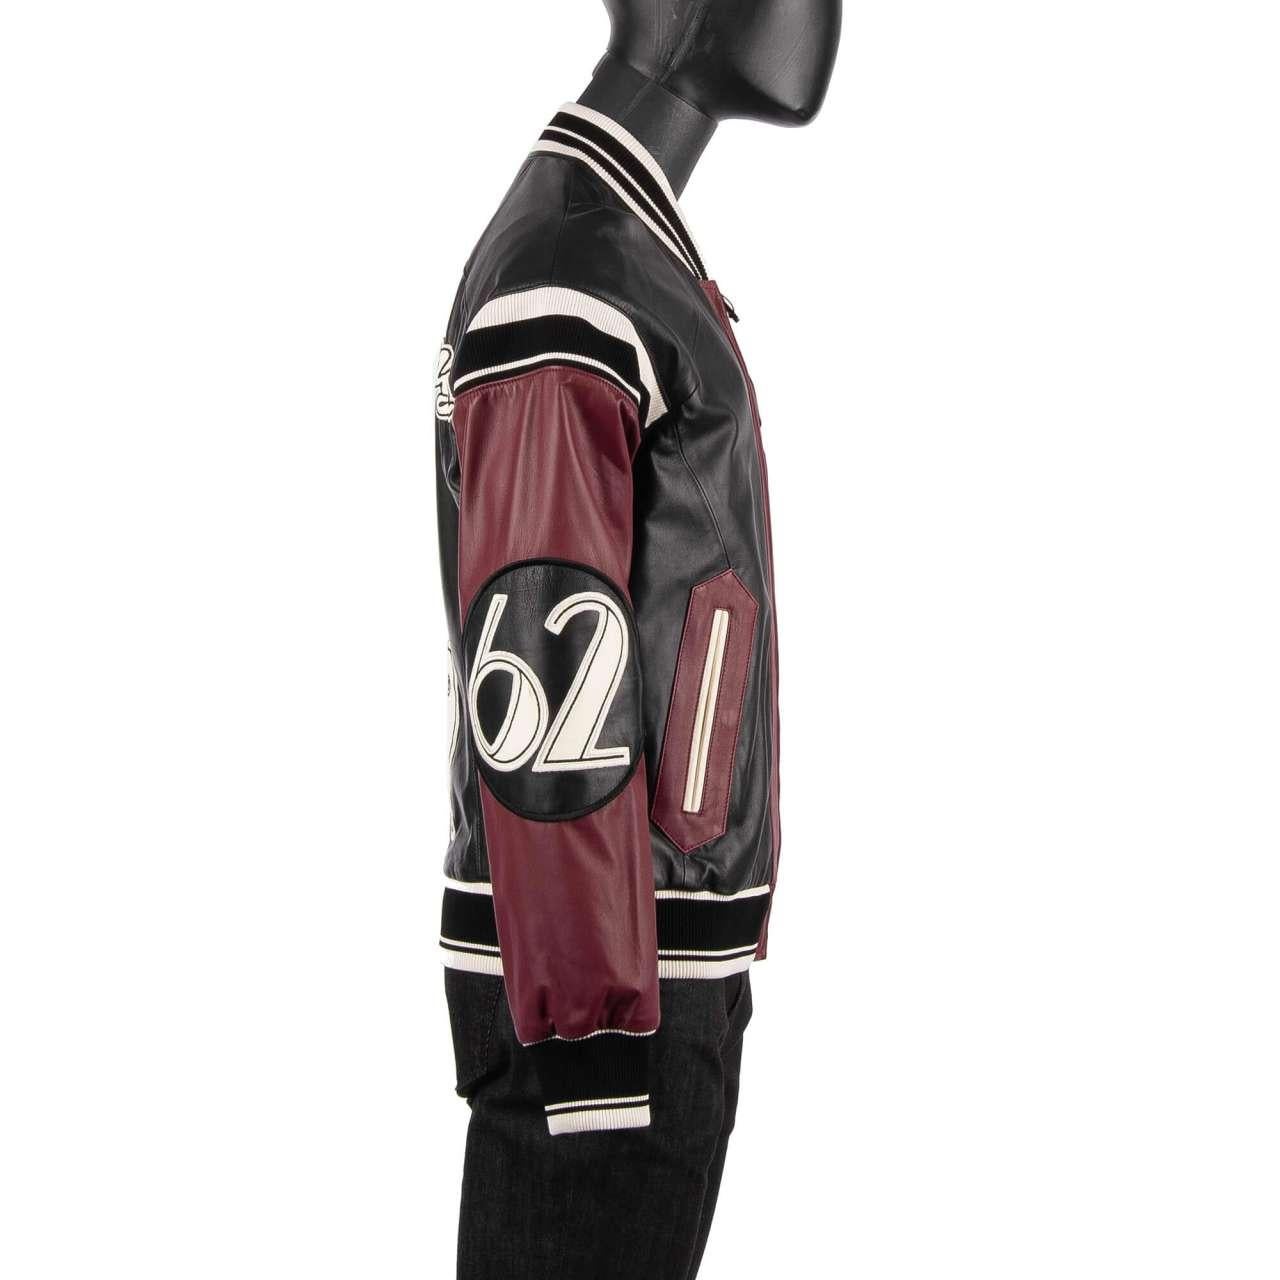 D&G Club Lounge Cello Embroidered Bomber Leather Jacket Black Bordeaux 52 In Excellent Condition For Sale In Erkrath, DE